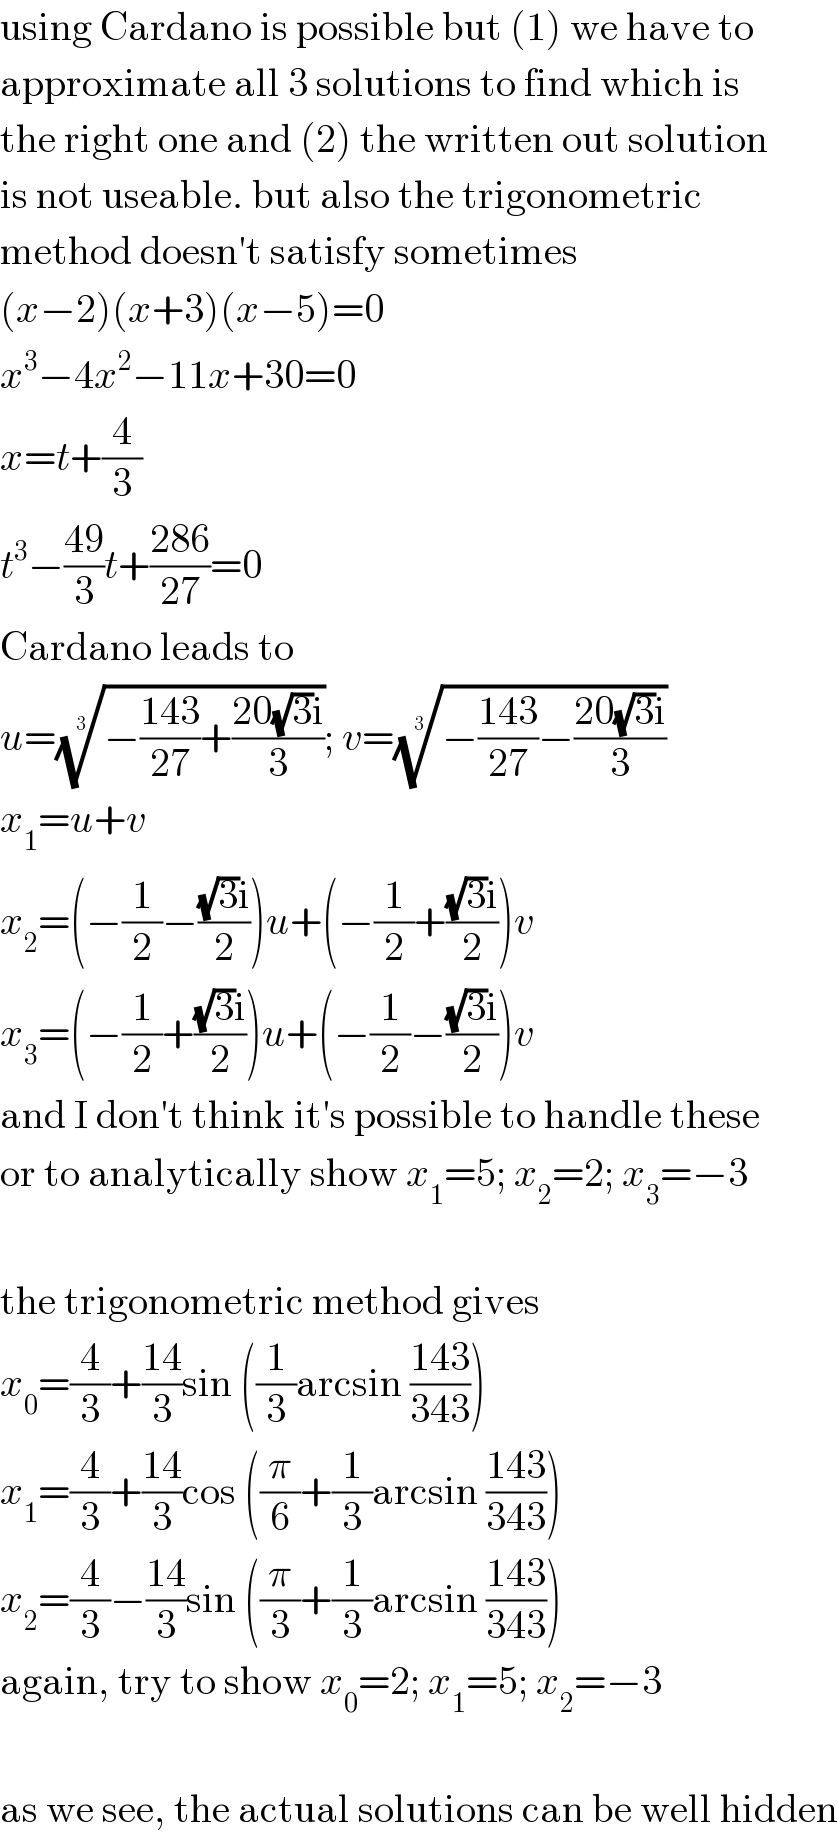 using Cardano is possible but (1) we have to  approximate all 3 solutions to find which is  the right one and (2) the written out solution  is not useable. but also the trigonometric  method doesn′t satisfy sometimes  (x−2)(x+3)(x−5)=0  x^3 −4x^2 −11x+30=0  x=t+(4/3)  t^3 −((49)/3)t+((286)/(27))=0  Cardano leads to  u=((−((143)/(27))+((20(√3)i)/3)))^(1/3) ; v=((−((143)/(27))−((20(√3)i)/3)))^(1/3)   x_1 =u+v  x_2 =(−(1/2)−(((√3)i)/2))u+(−(1/2)+(((√3)i)/2))v  x_3 =(−(1/2)+(((√3)i)/2))u+(−(1/2)−(((√3)i)/2))v  and I don′t think it′s possible to handle these  or to analytically show x_1 =5; x_2 =2; x_3 =−3    the trigonometric method gives  x_0 =(4/3)+((14)/3)sin ((1/3)arcsin ((143)/(343)))  x_1 =(4/3)+((14)/3)cos ((π/6)+(1/3)arcsin ((143)/(343)))  x_2 =(4/3)−((14)/3)sin ((π/3)+(1/3)arcsin ((143)/(343)))  again, try to show x_0 =2; x_1 =5; x_2 =−3    as we see, the actual solutions can be well hidden  